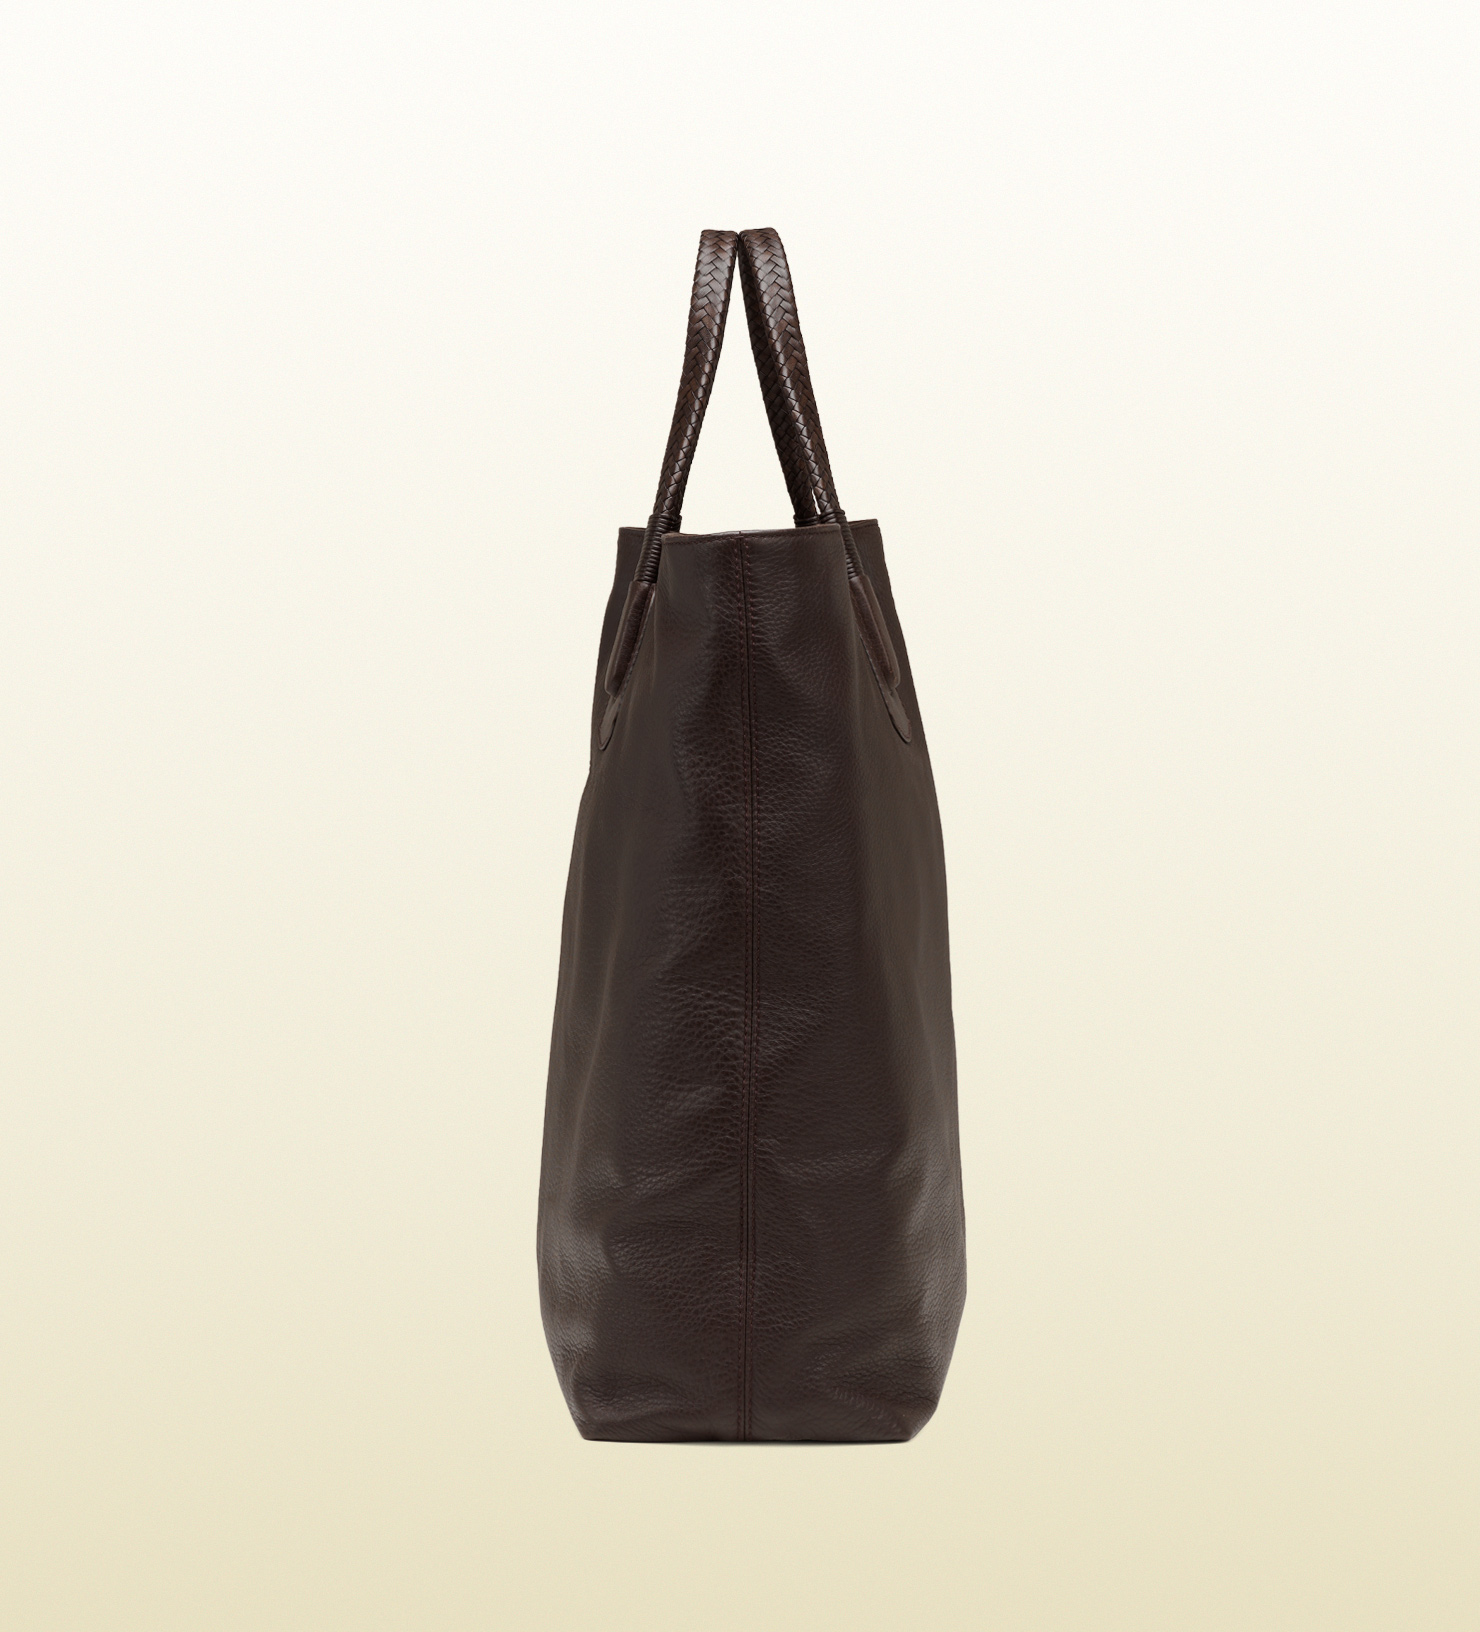 Gucci Dark Brown Leather Tote Bag in Brown | Lyst